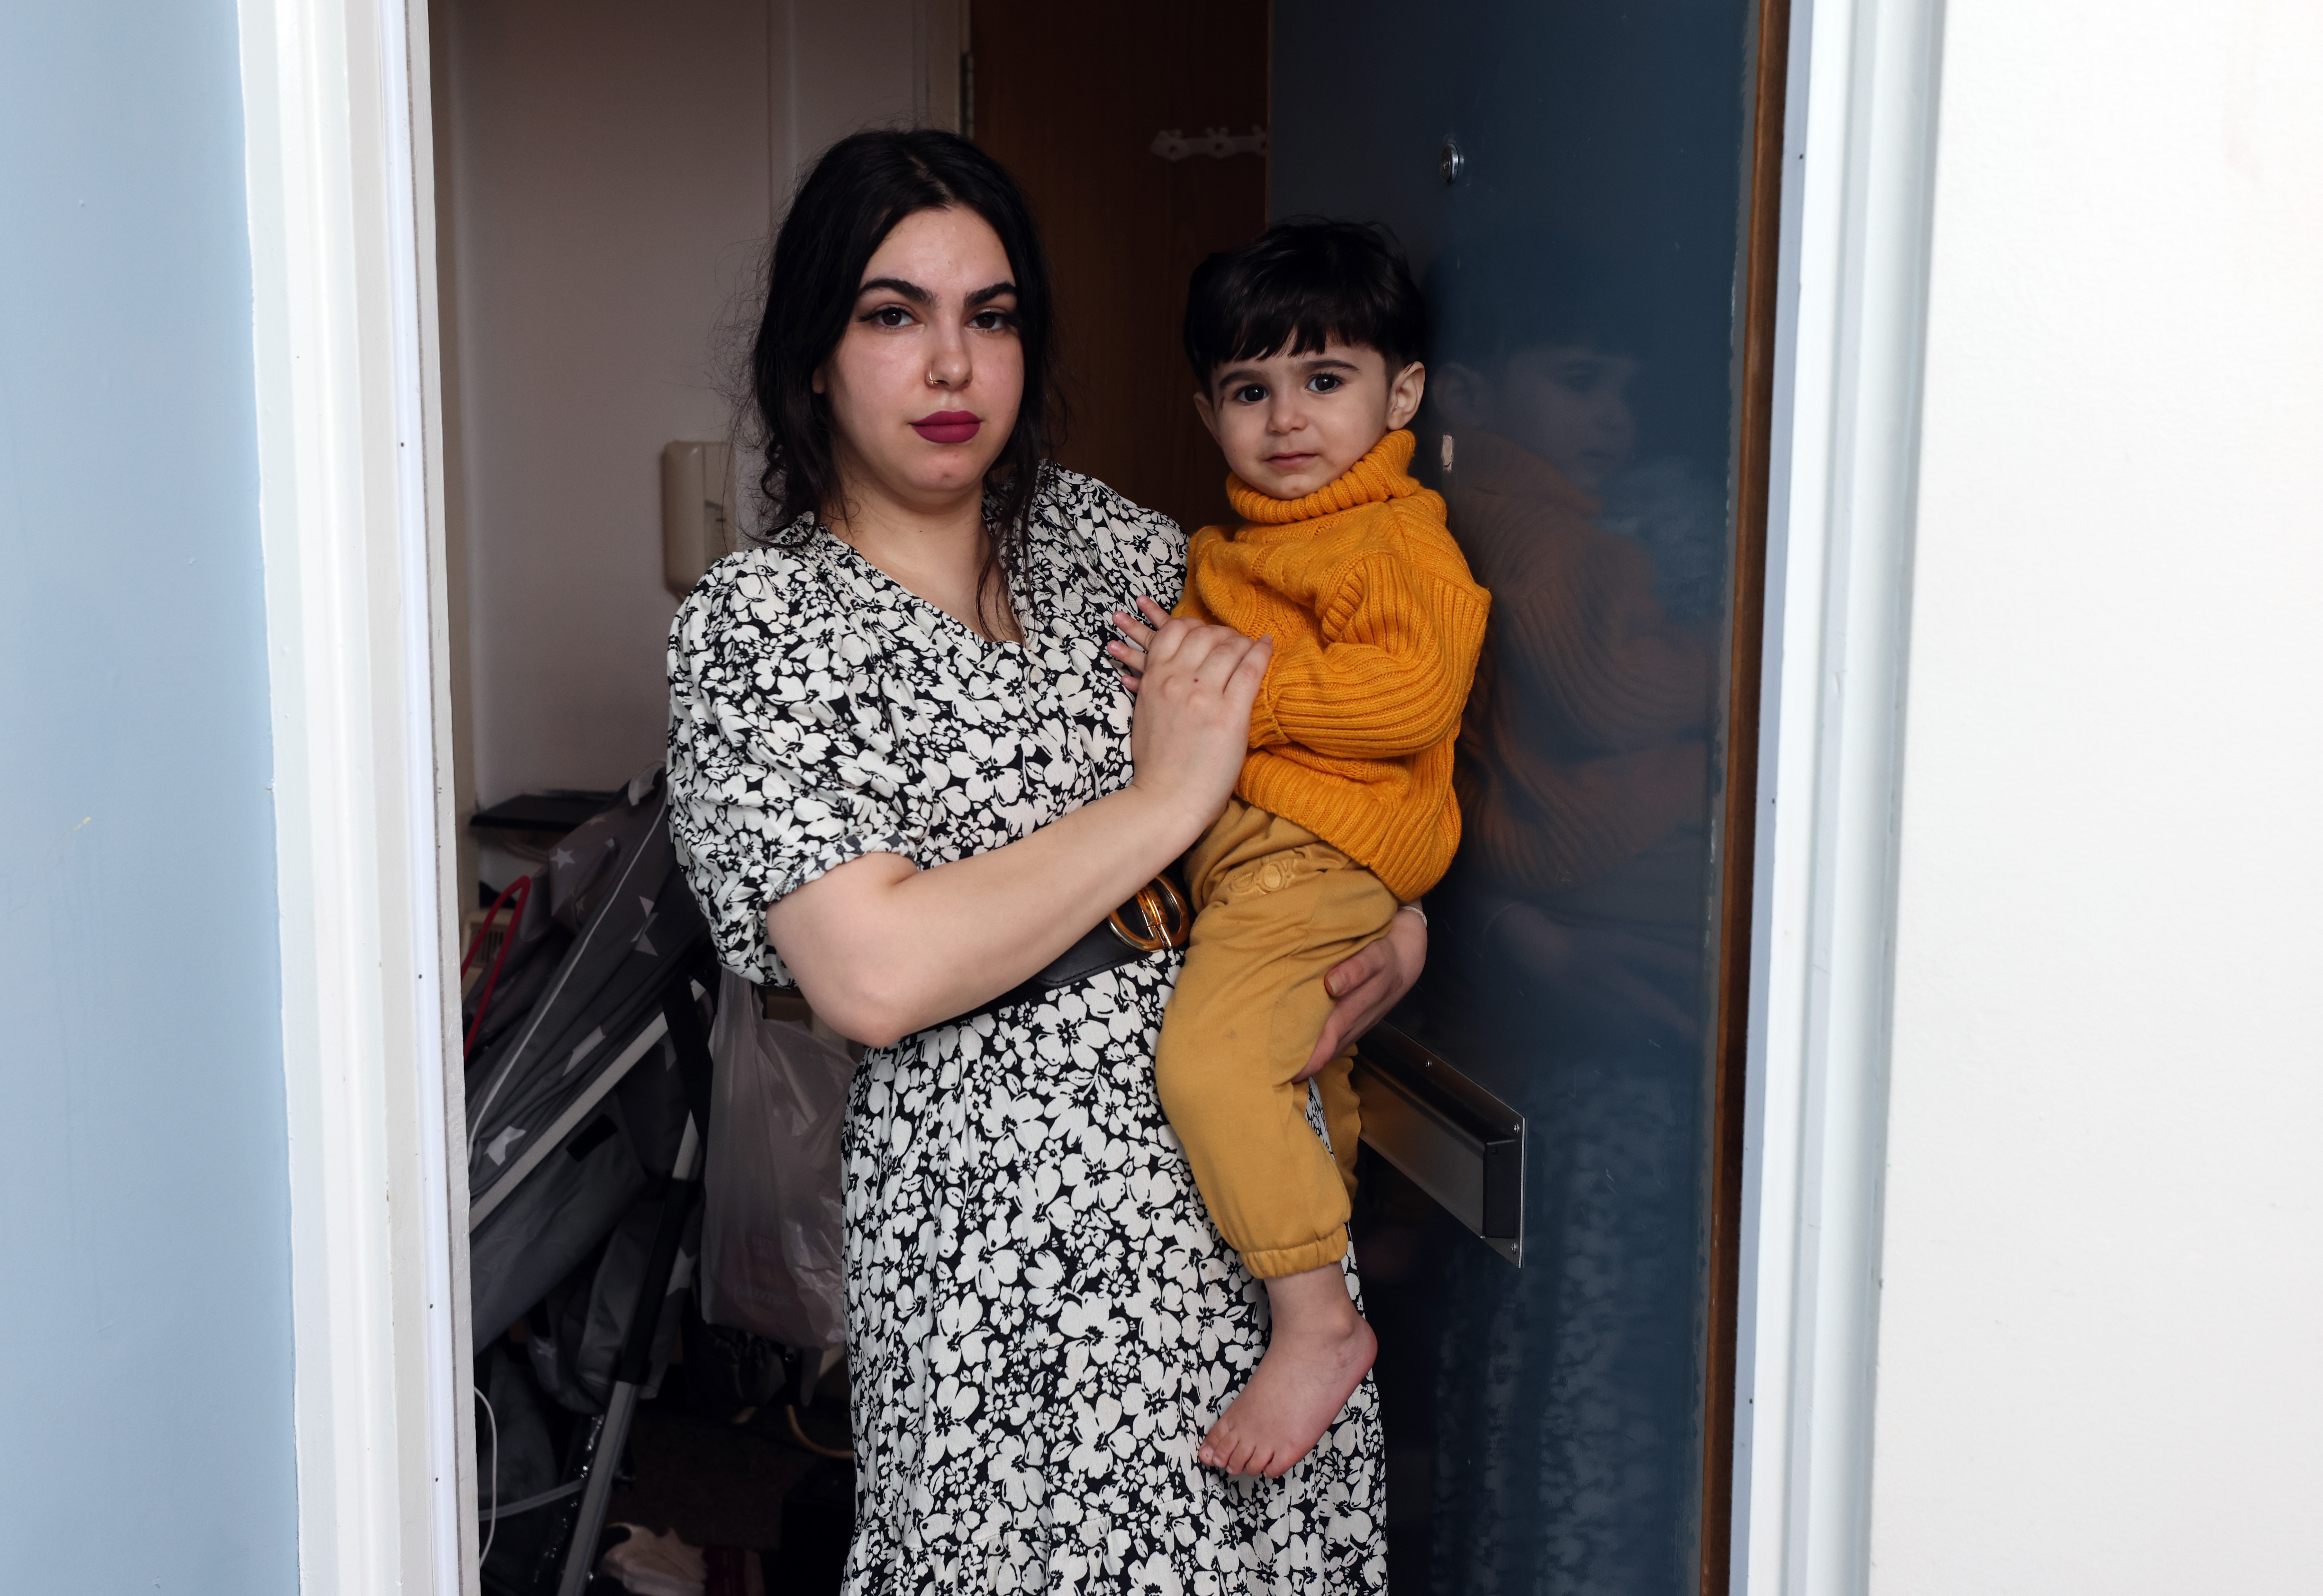 Young mum Mina Habibi says she feels trapped inside her own home